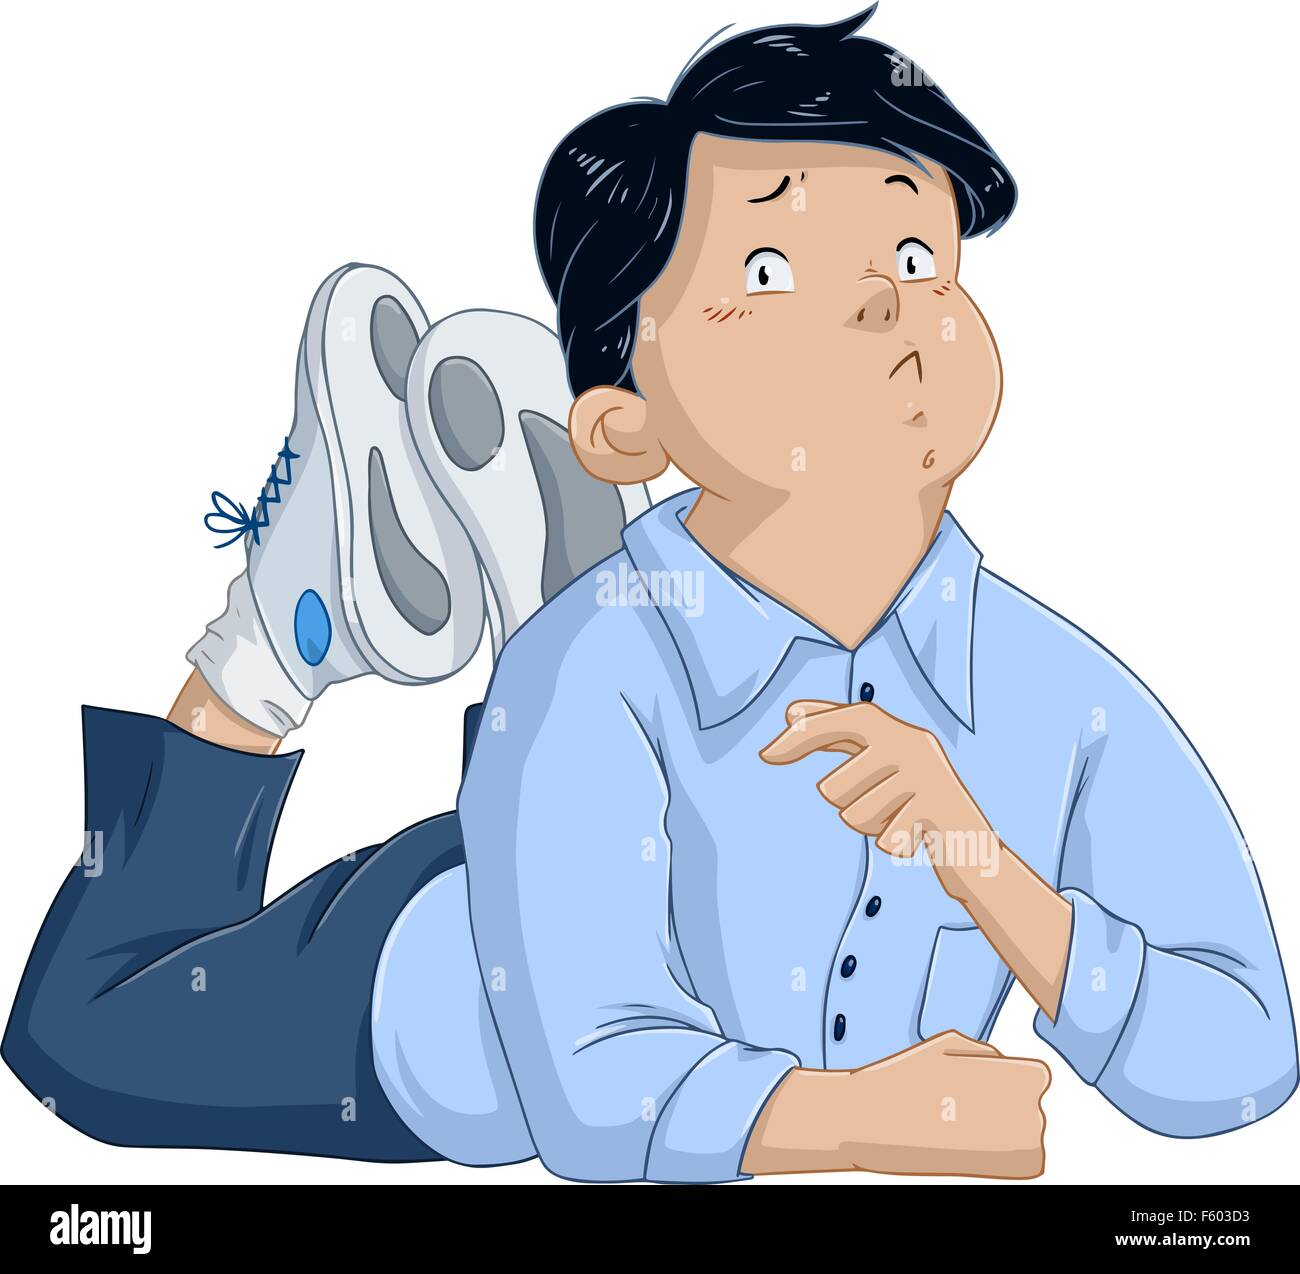 Vector illustration of an uncertain boy laying on the floor. Stock Vector